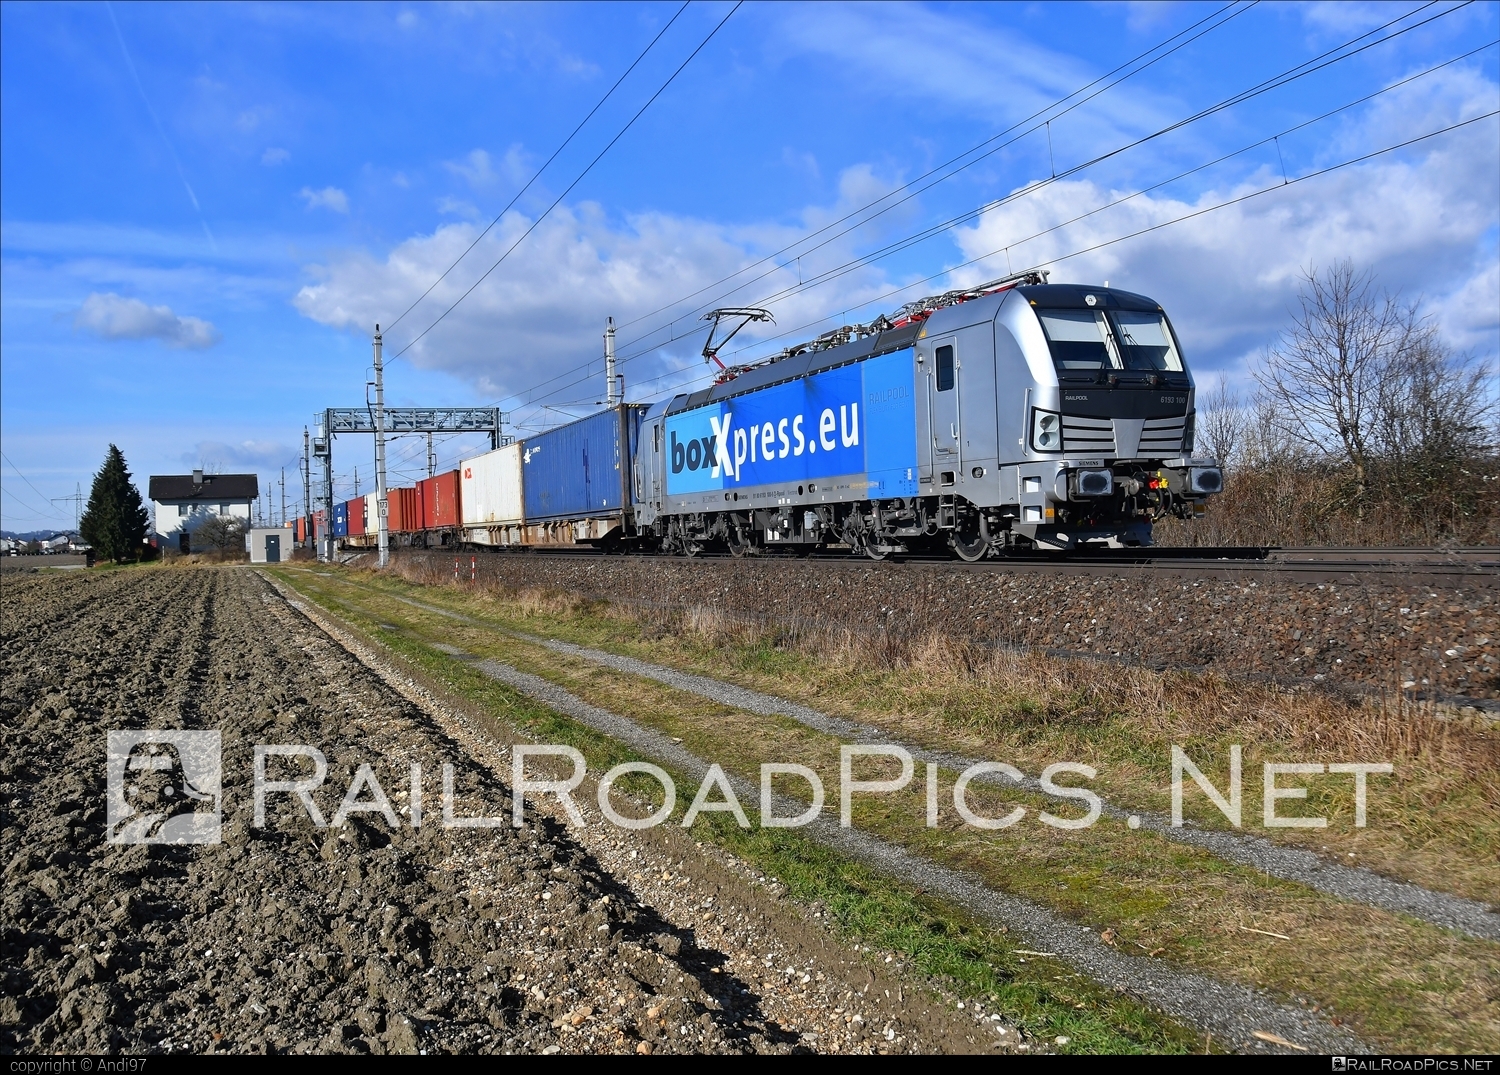 Siemens Vectron MS - 6193 100 operated by BoxXpress.de GmbH #boxxpress #container #flatwagon #railpool #railpoolgmbh #siemens #siemensVectron #siemensVectronMS #vectron #vectronMS